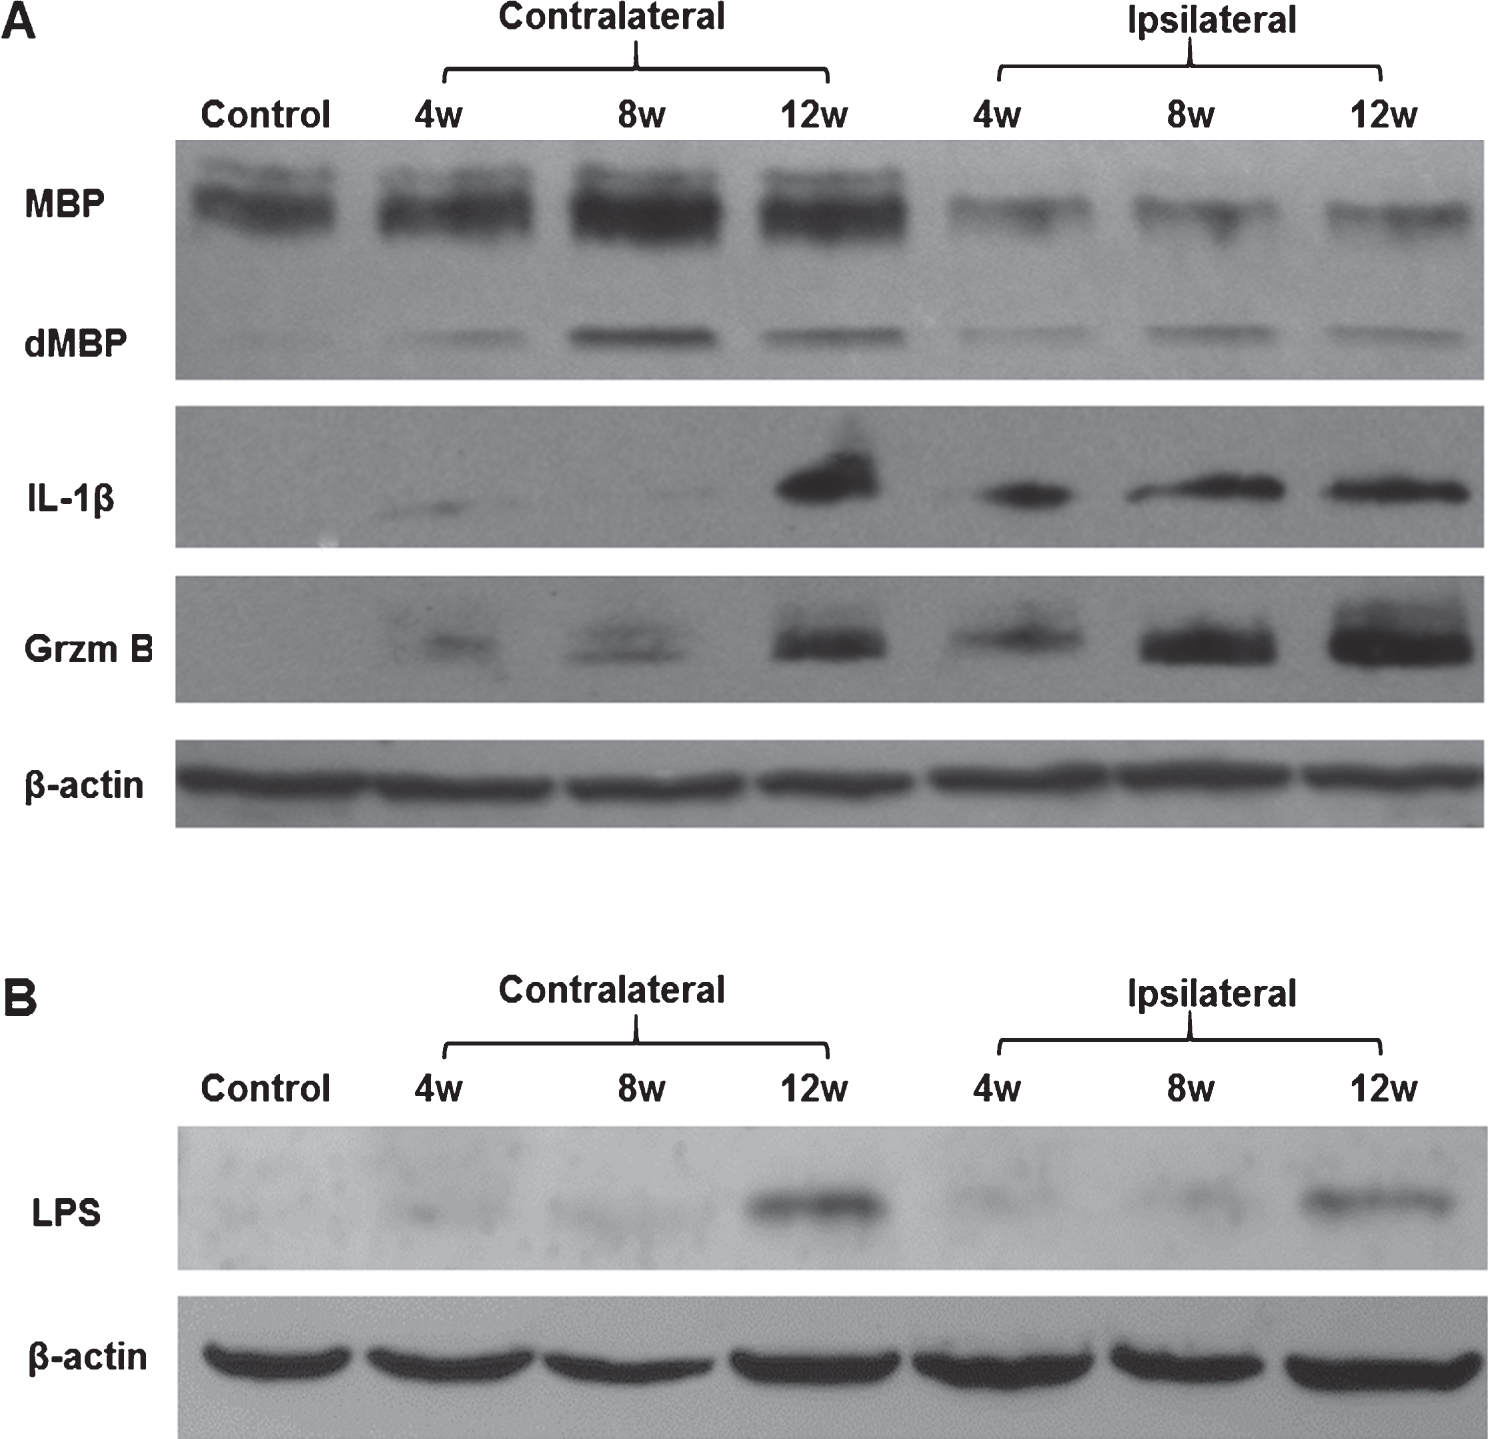 Western blot analysis of brain samples of animals subjected to lipopolysaccharide /ischemia /hypoxia (LPS/IS/H). Animals were subjected to LPS/IS/H and sacrificed 4 weeks, 8 weeks, and 12 weeks later. Naïve animals were used as control. One animal in each time point was examined. The cortex, basal ganglia, and hippocampus ipsilateral to the focal ischemia and contralateral to the ischemia were taken for Western blotting. A) Staining of brain samples was performed using antibodies to myelin basic protein (MBP), interleukin-1β (IL-1β), and Granzyme B (Grzm B). Note decreased MBP in the ipsilateral hemisphere compared to control and contralateral hemisphere; appearance of degraded MBP (dMBP) in the ipsilateral and contralateral hemisphere; and the gradual induction of both IL-1β and Grzm B in the ipsilateral and contralateral hemisphere from 4 to 12 weeks after LPS/IS/H. β-actin was used as the loading control. B) LPS (MW ∼30 kDa) was detected on Western blot analysis in cortex ipsilateral and contralateral to the focal cerebral ischemia at 4 weeks, 8 weeks, and 12 weeks after the LPS/IS/H. Note increased LPS at 12 weeks compared to that at 4 or 8 weeks. LPS was absent in control brain. β-actin was used as loading control, showing somewhat less loading in the 8 week samples.